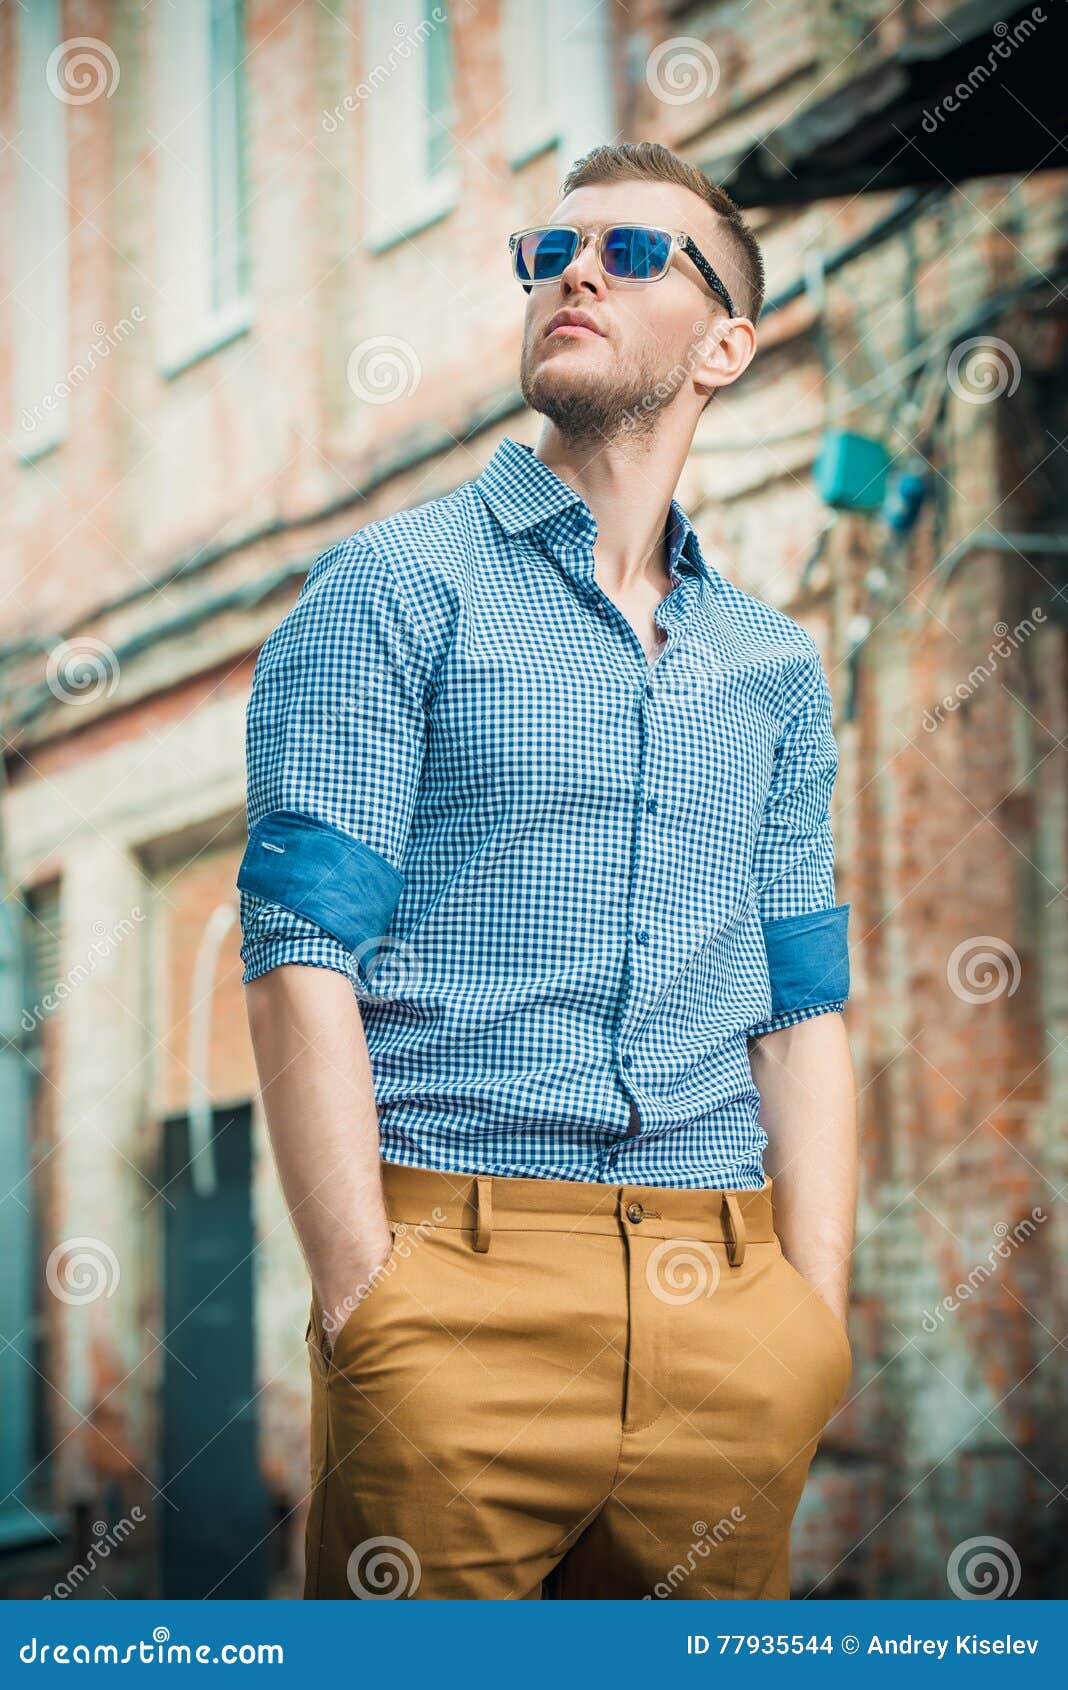 Young man on a street stock photo. Image of outdoors - 77935544